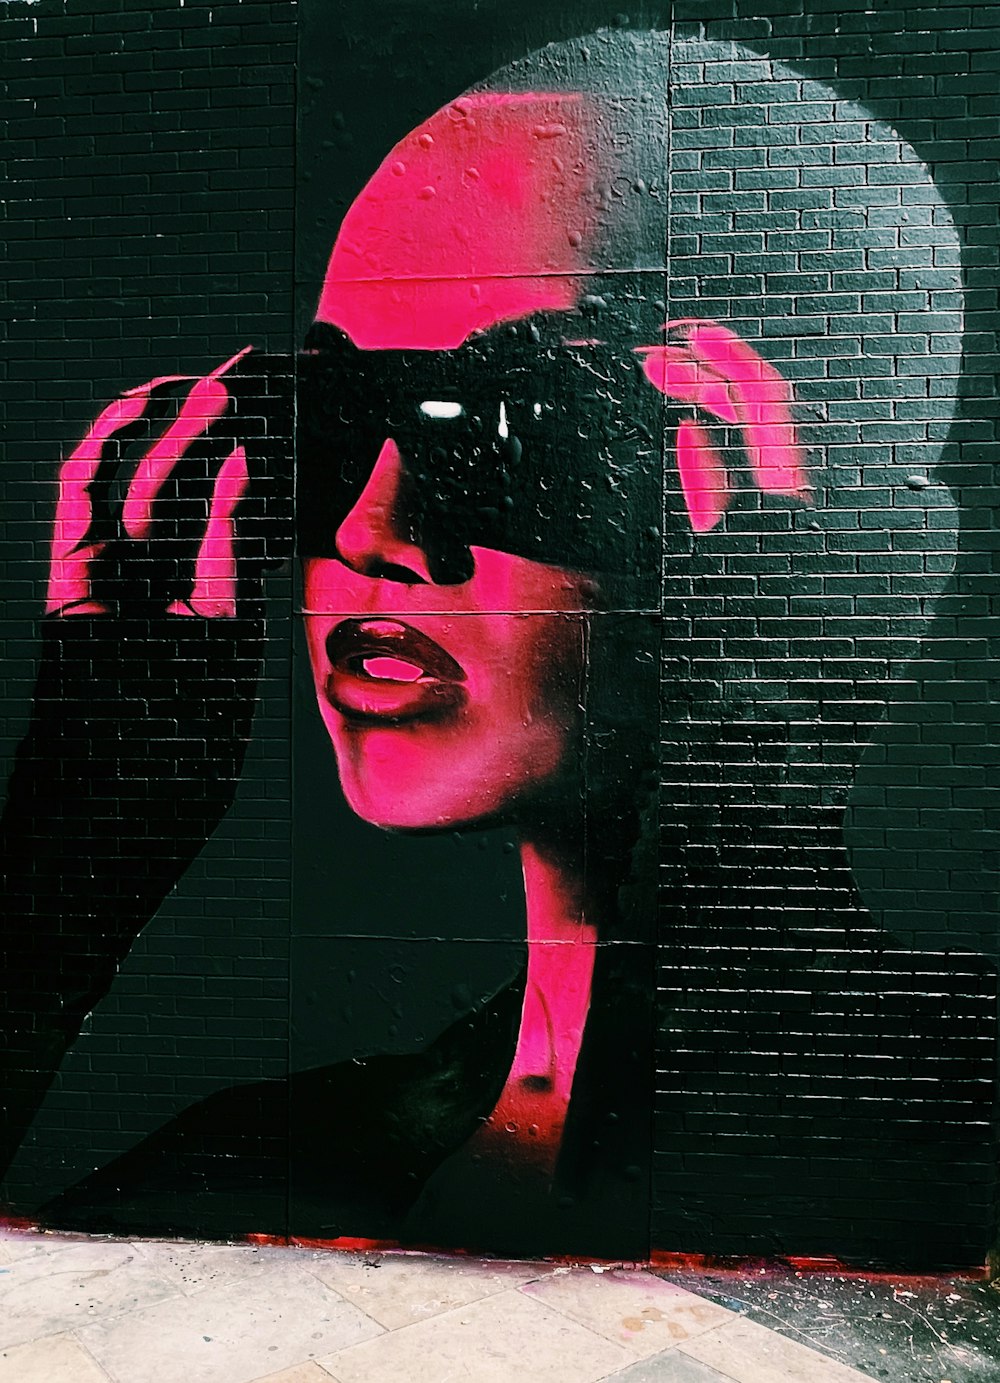 a painting of a woman with sunglasses on her face